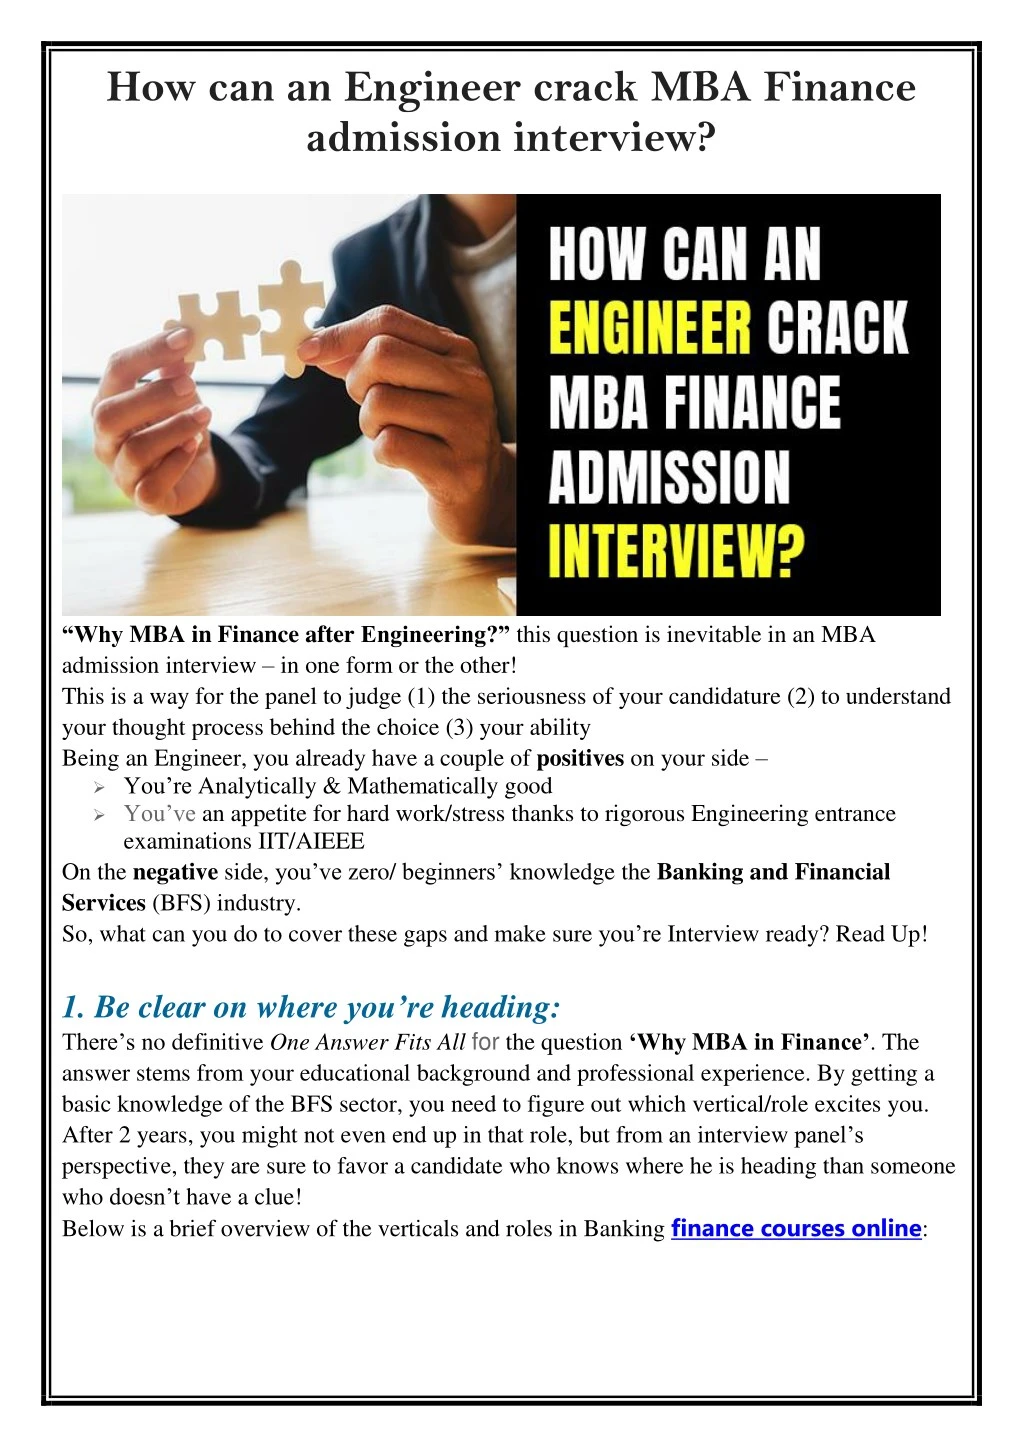 how can an engineer crack mba finance admission